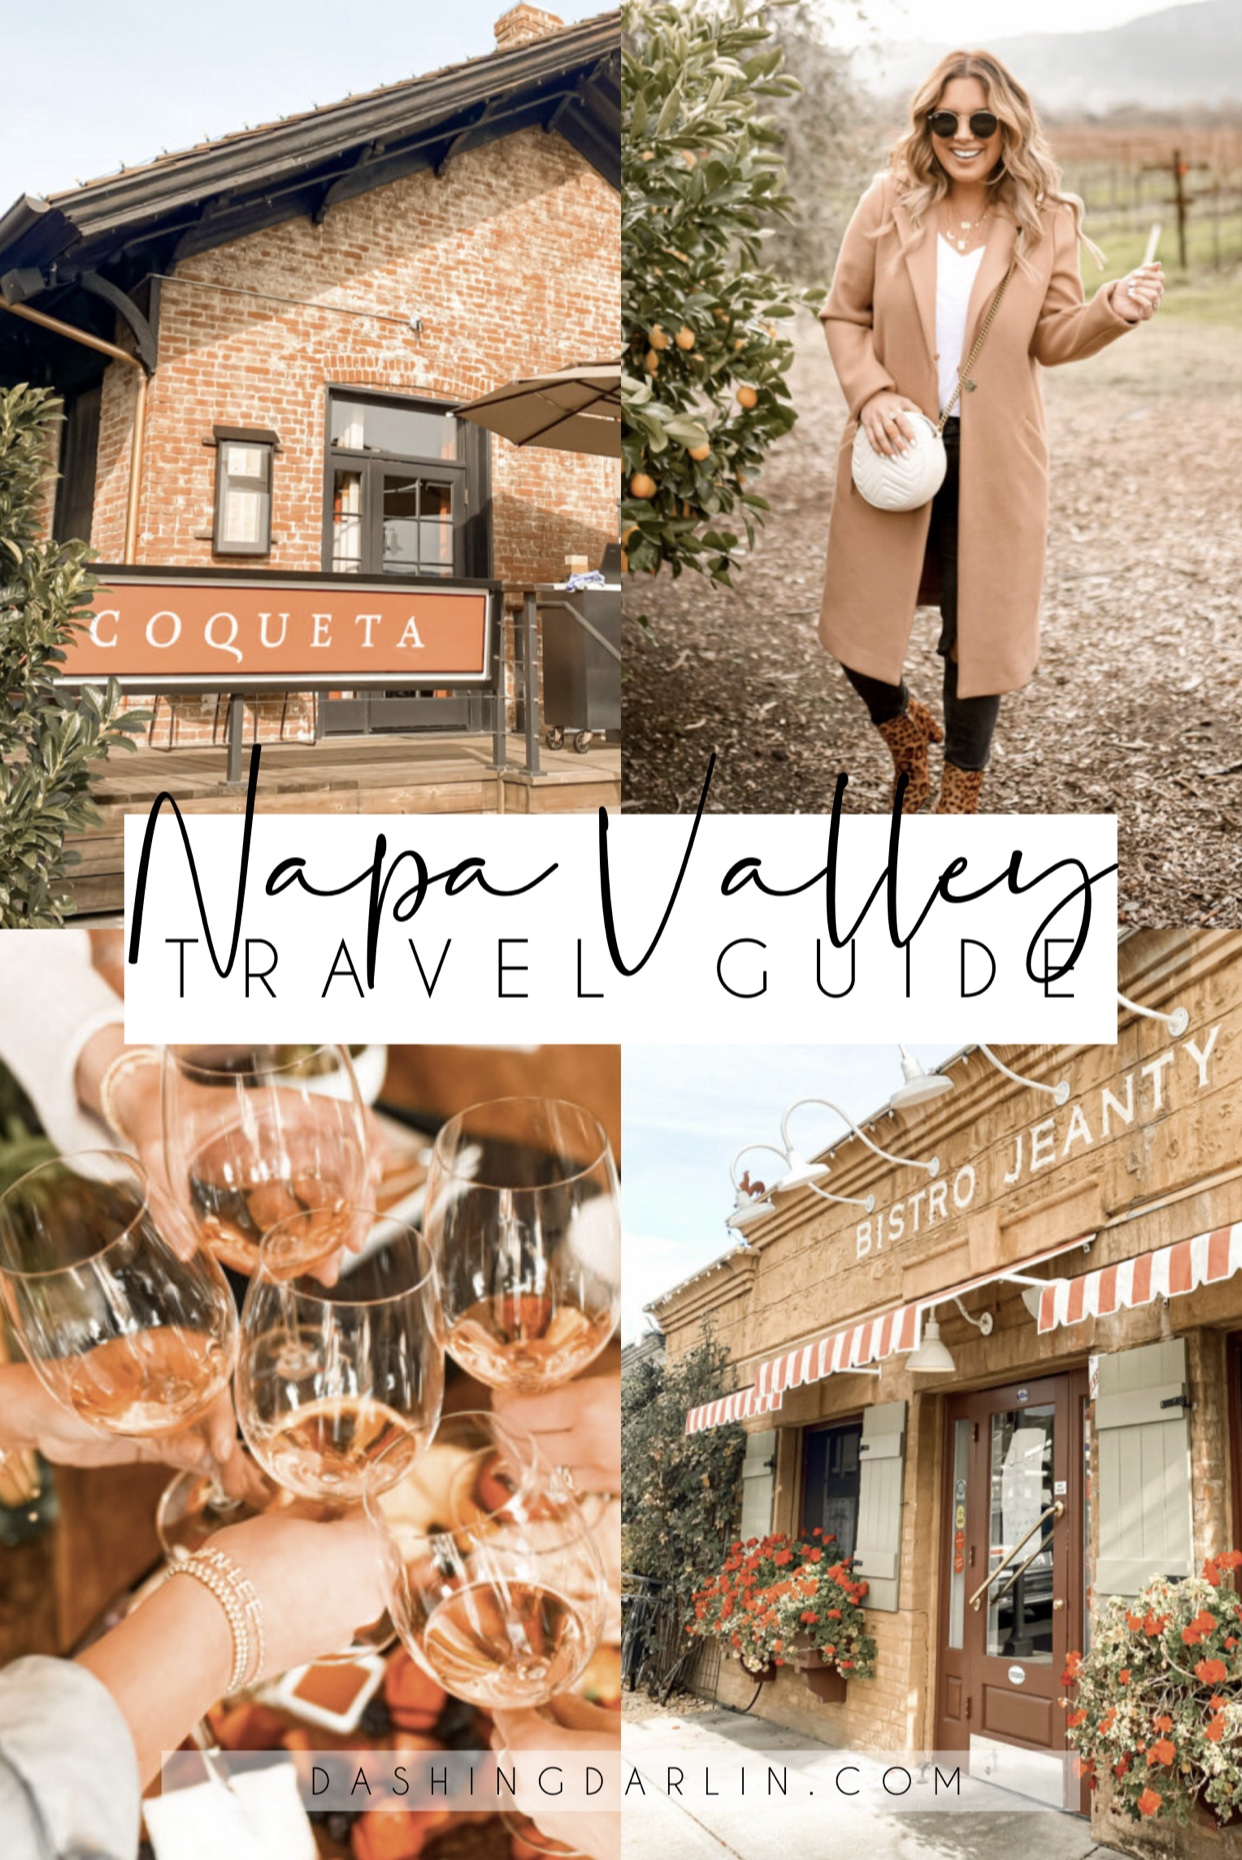 36 HOURS IN NAPA VALLEY TRAVEL GUIDE - Dashing Darlin